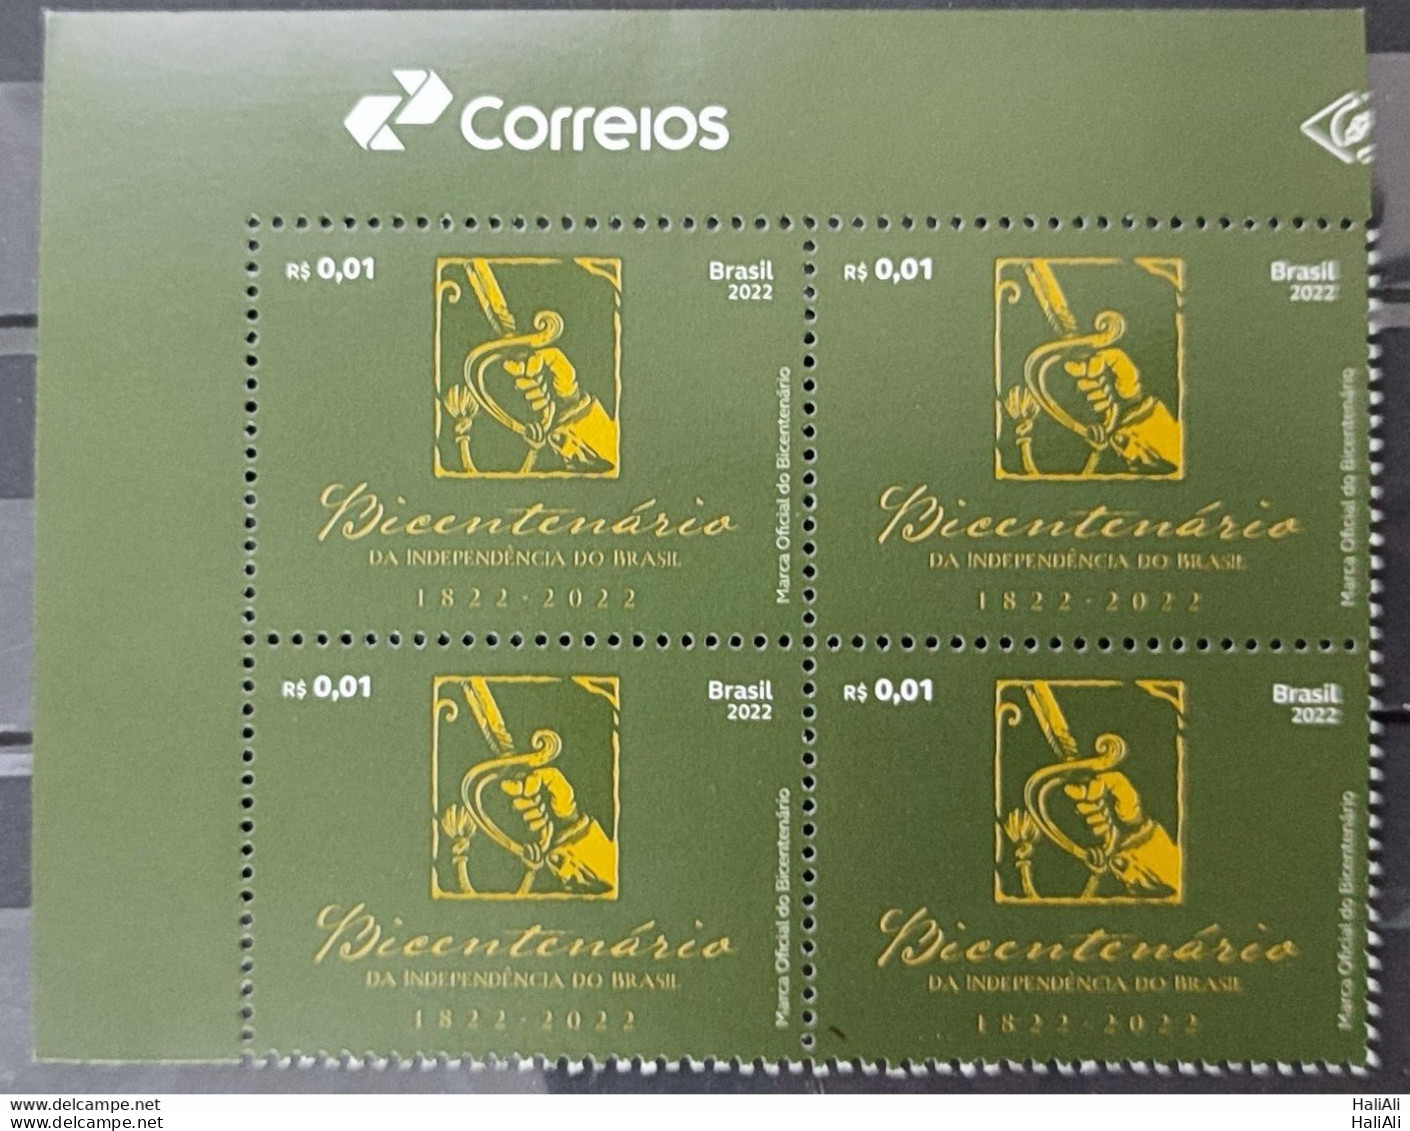 C 4055 Brazil Stamp Bicentennial Of Independence Official Brand Sword Portugal 2022 Block Of 4 Vignette Correios - Neufs